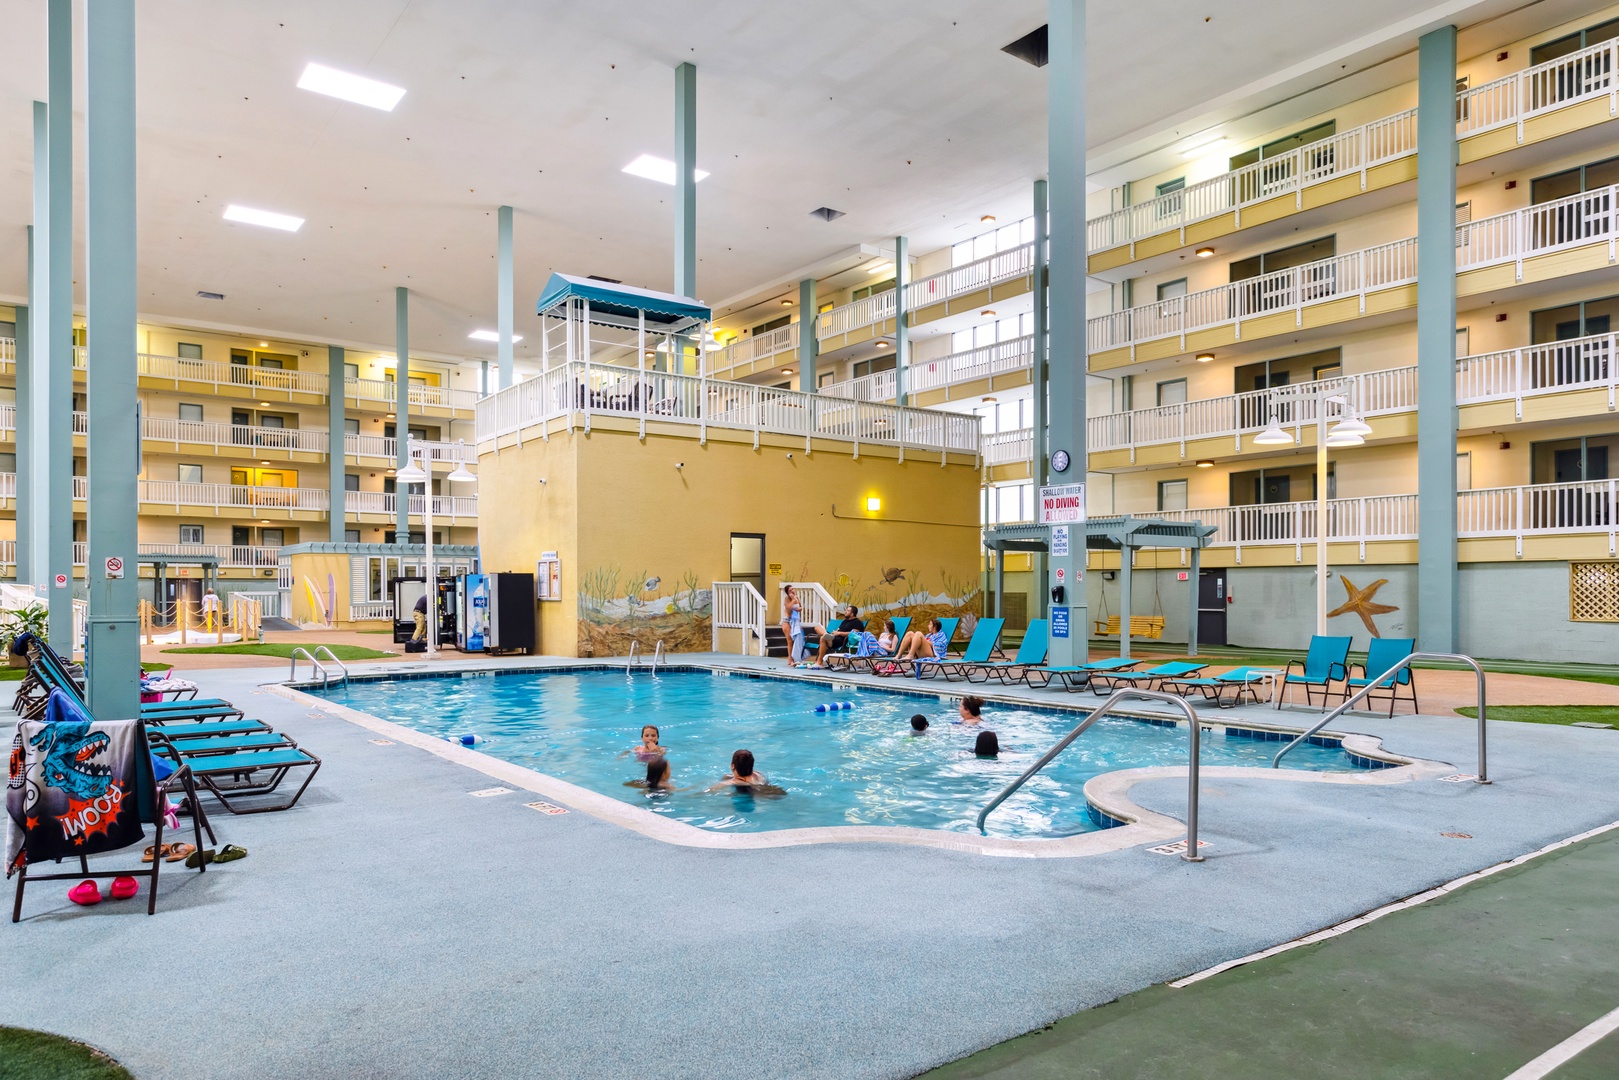 Lounge the day away or make a splash at the community indoor pool and hot tub